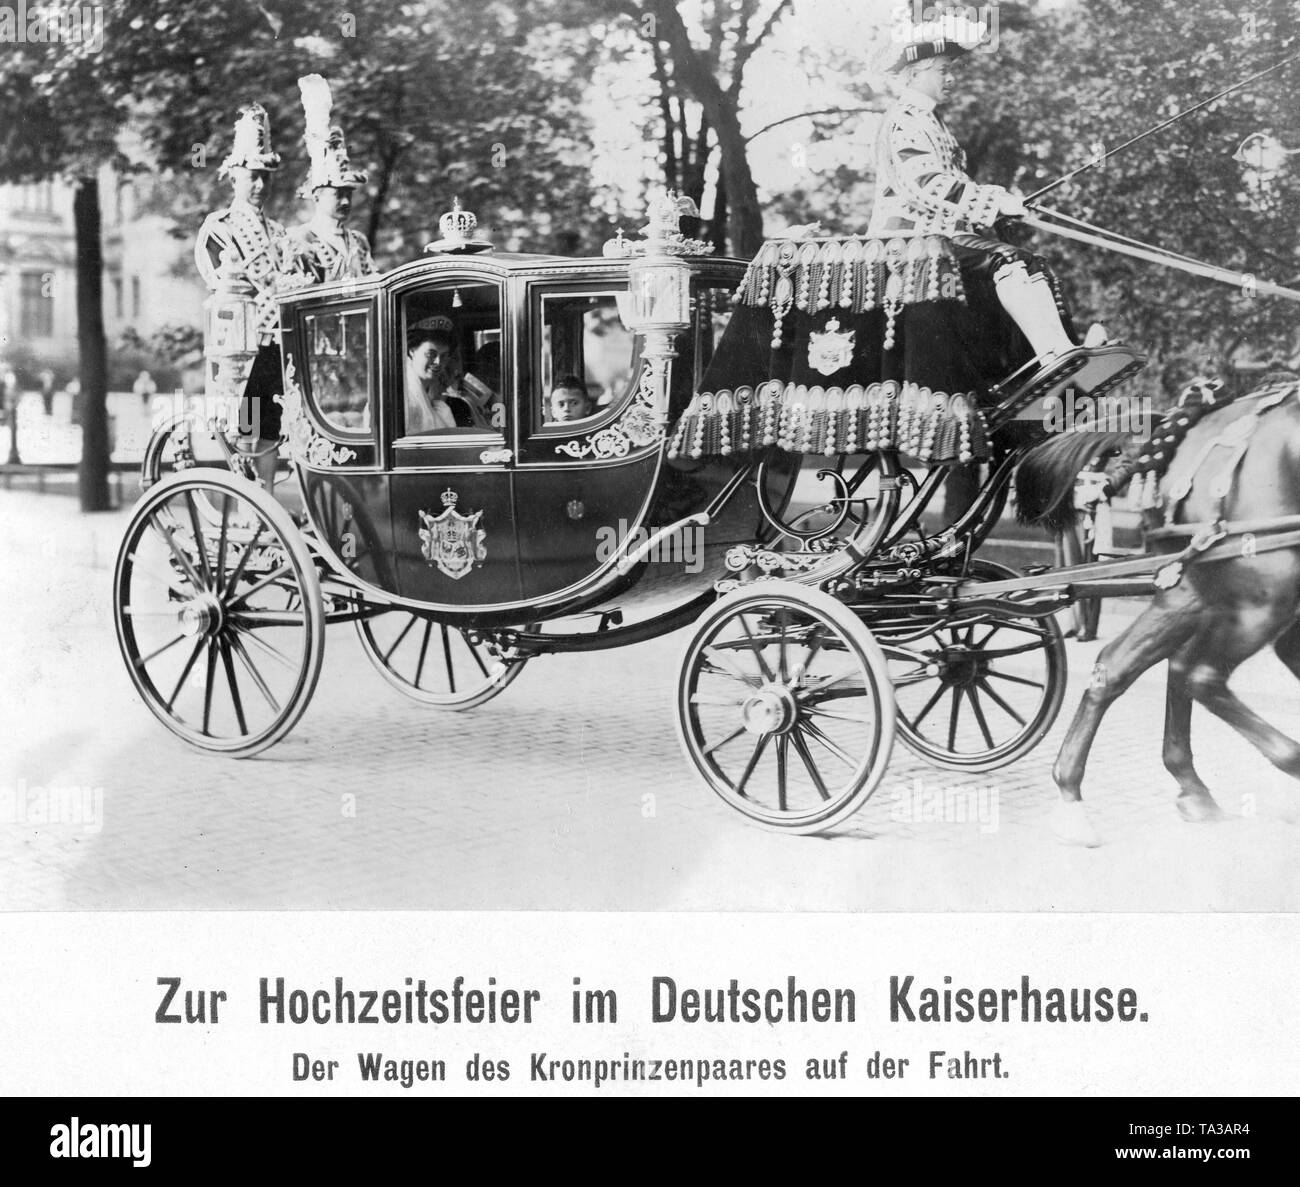 Crown Prince Wilhelm of Prussia, his wife Crown Princess Cecilie and their son Prince Wilhelm drive through Berlin in a carriage. The photo was taken at the wedding ceremony of the sister of the Crown Prince, Princess Viktoria Luise of Prussia, with Prince Ernst August of Hanover. Stock Photo